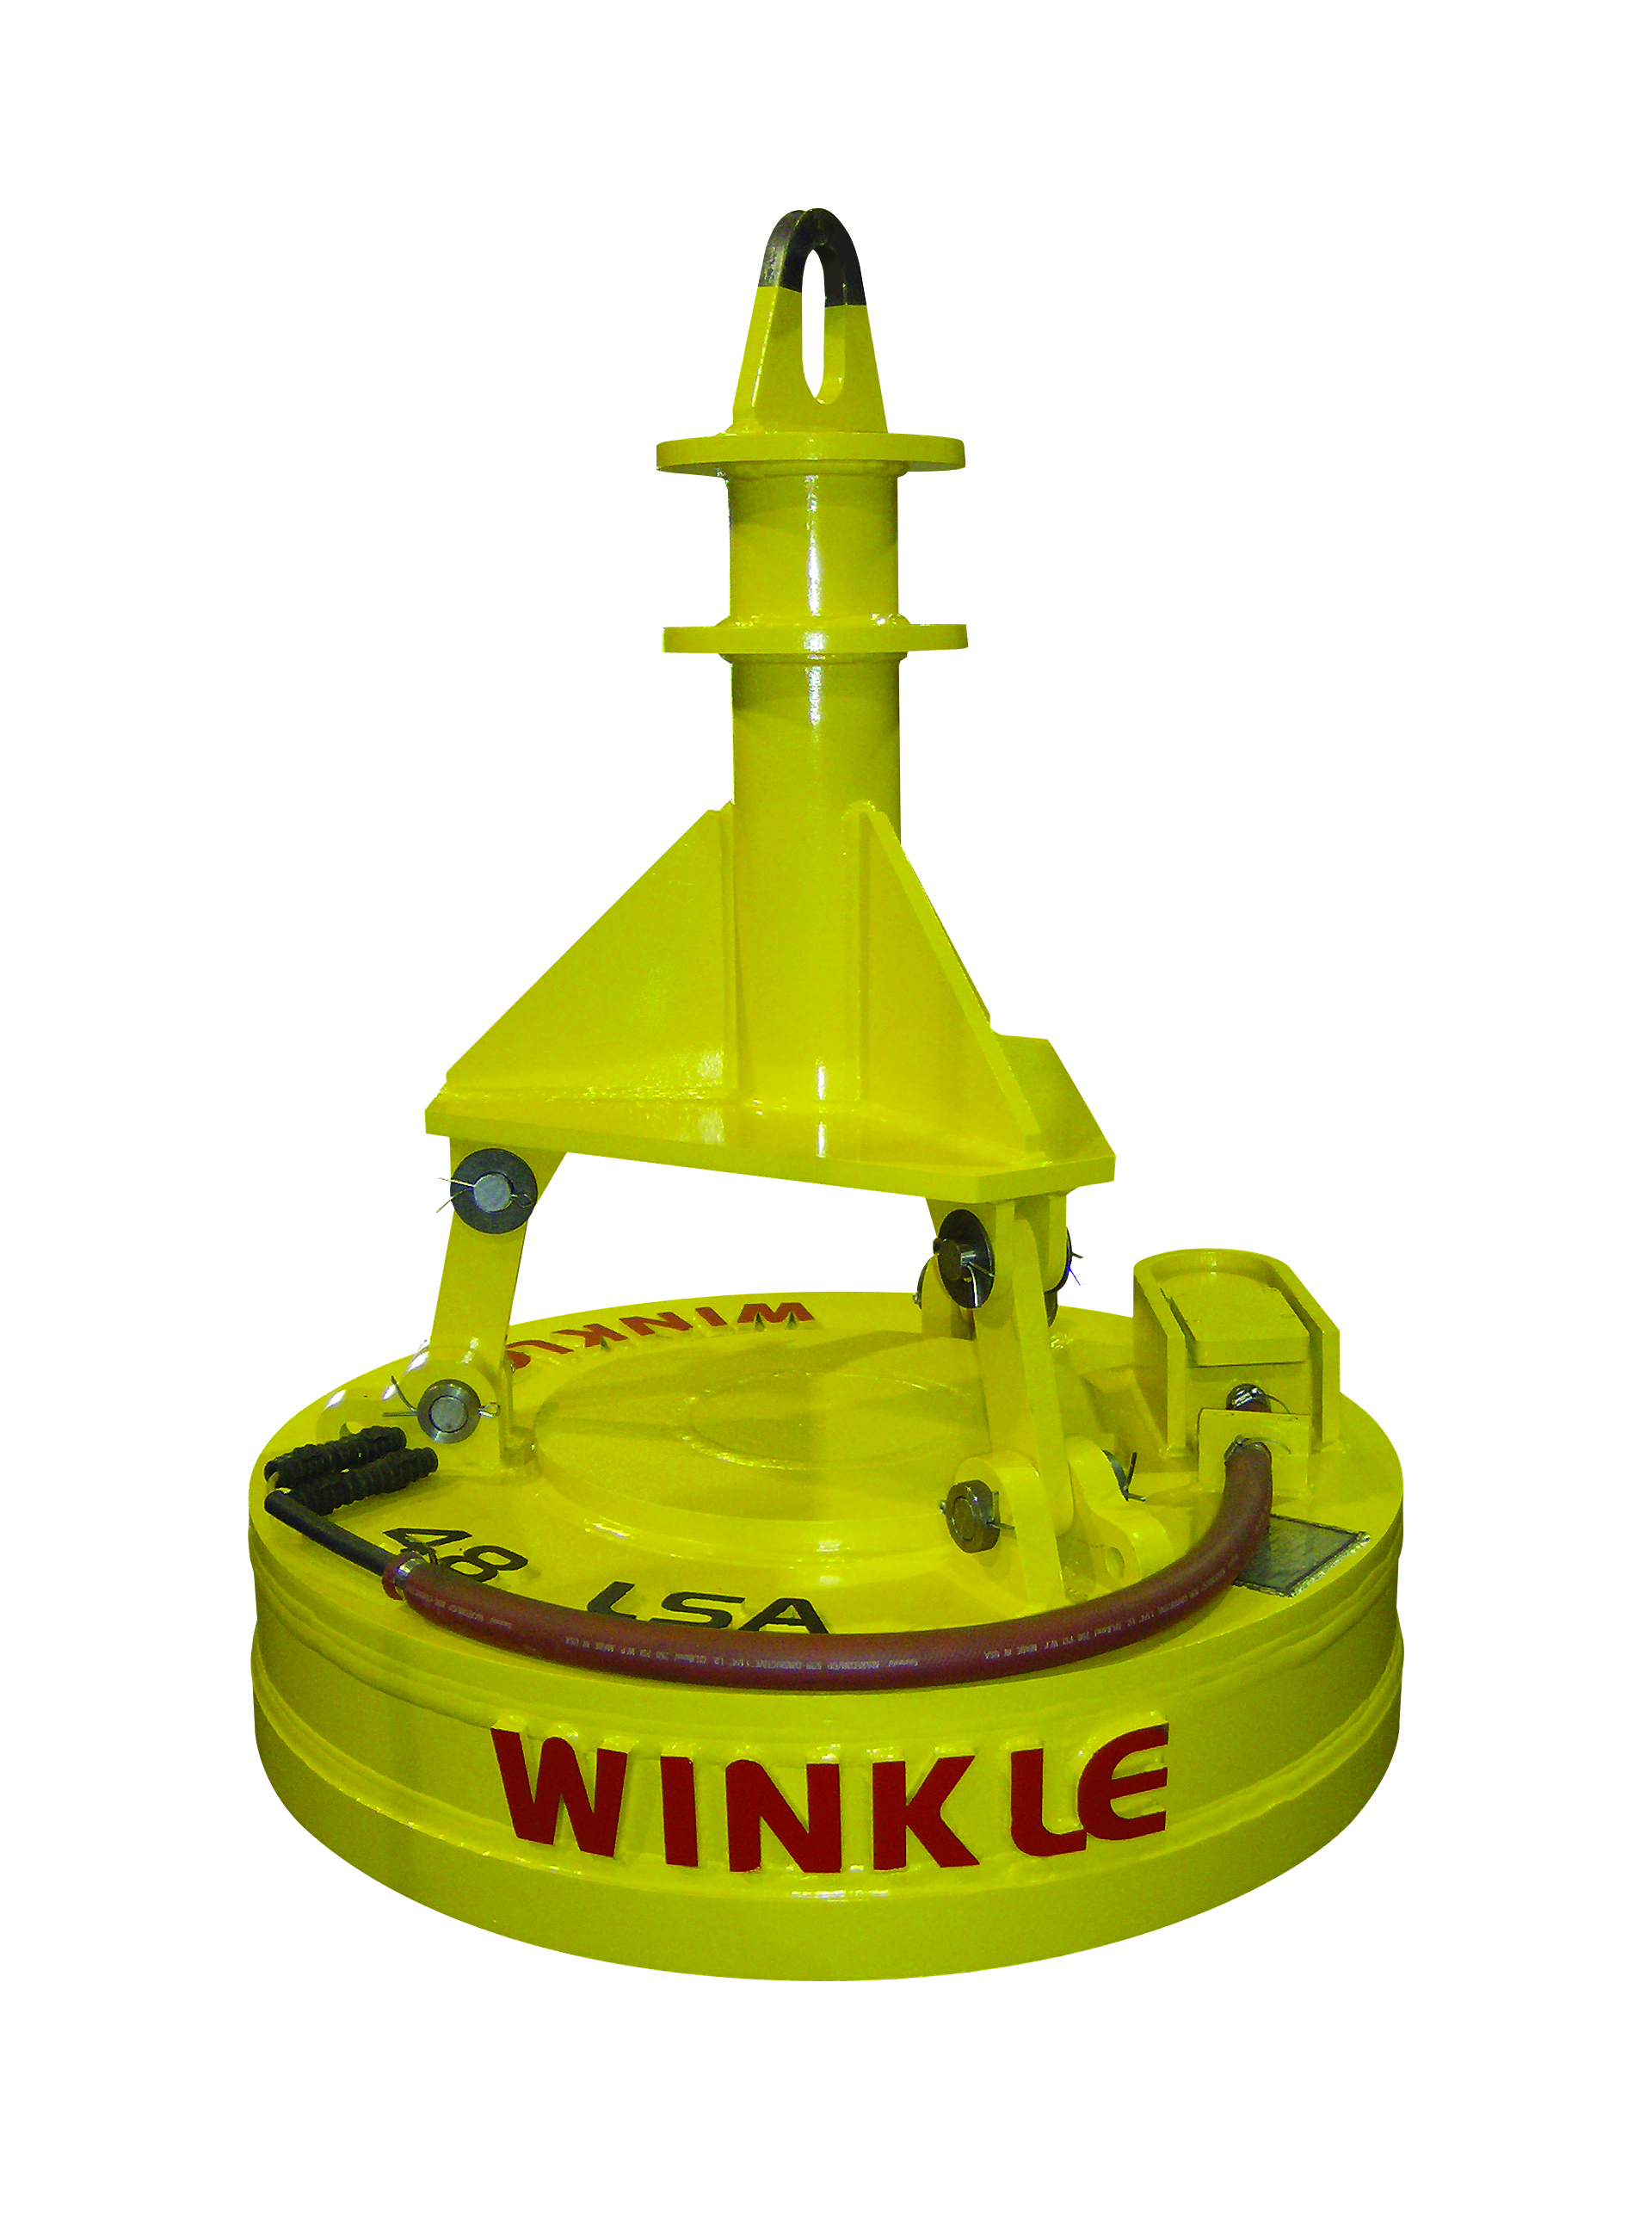 Grab And Go – Winkle Industries Adds A Tower Of Productivity For Its Line Of Lifting Magnets